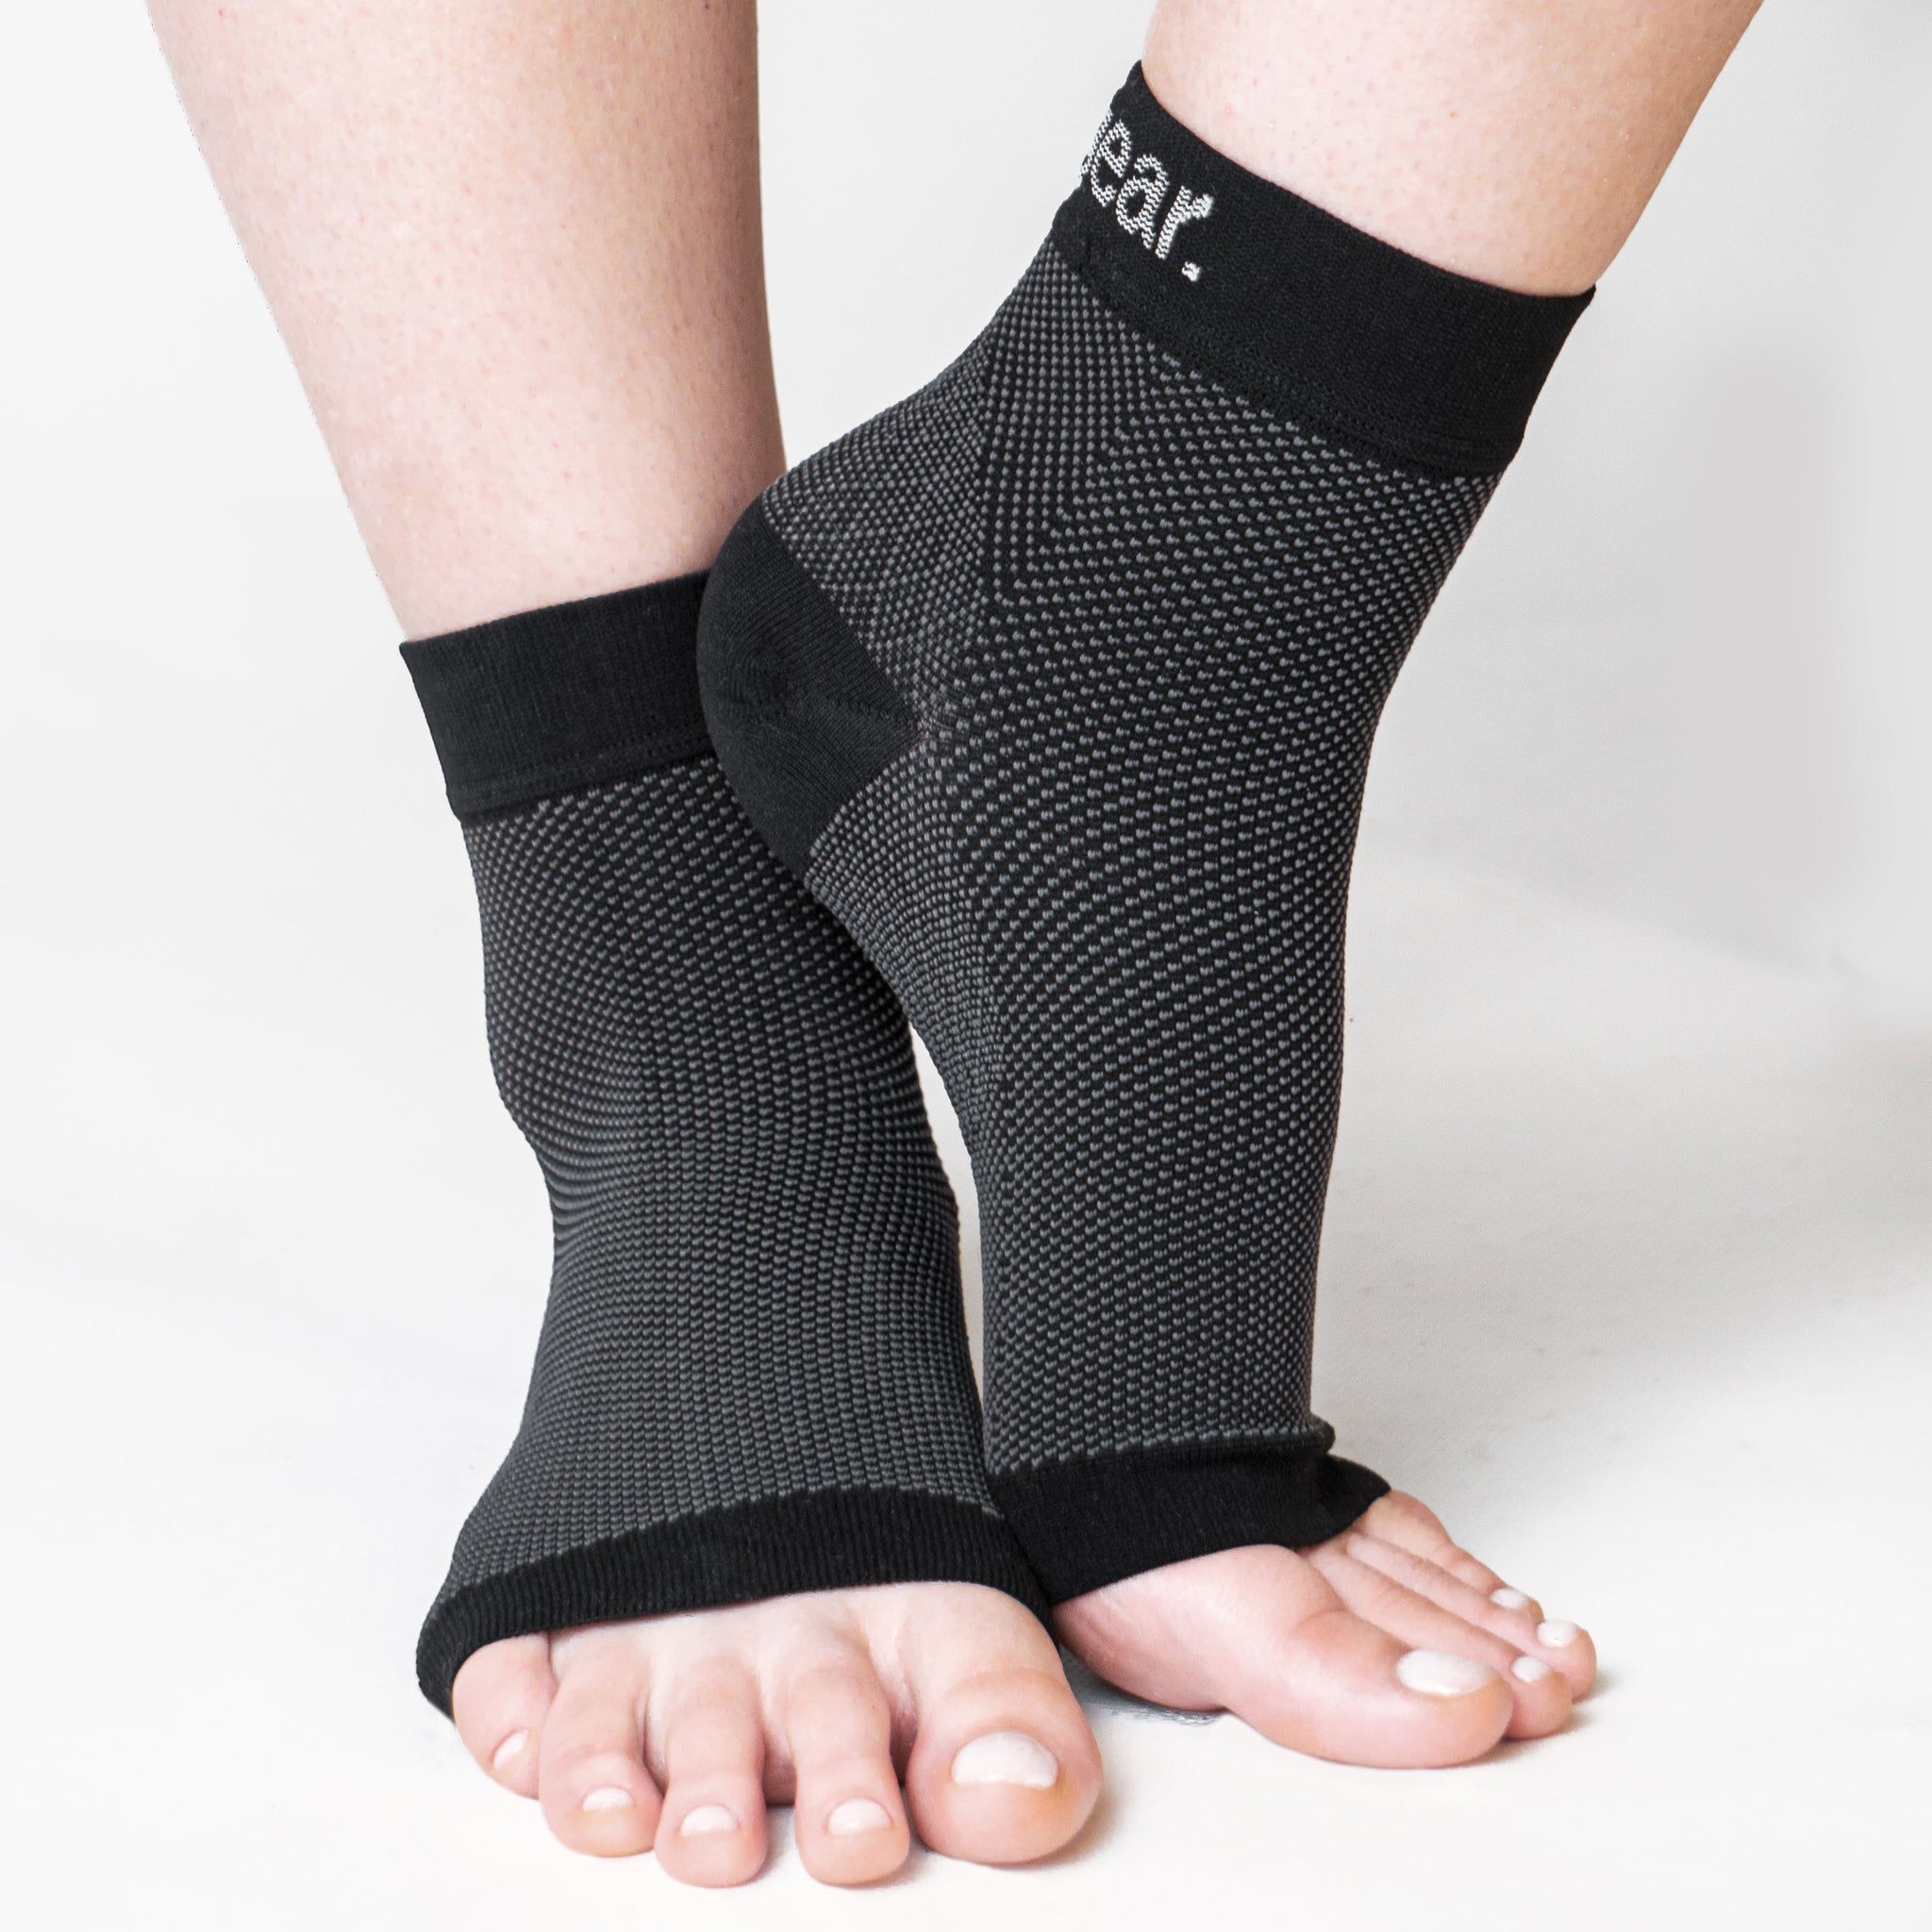 aZengear Ankle Support Sleeves (2 Pairs) for Men and Women - Plantar Fasciitis Socks, Fast Foot Pain Relief, Arch Heel Brace for Achilles Tendon